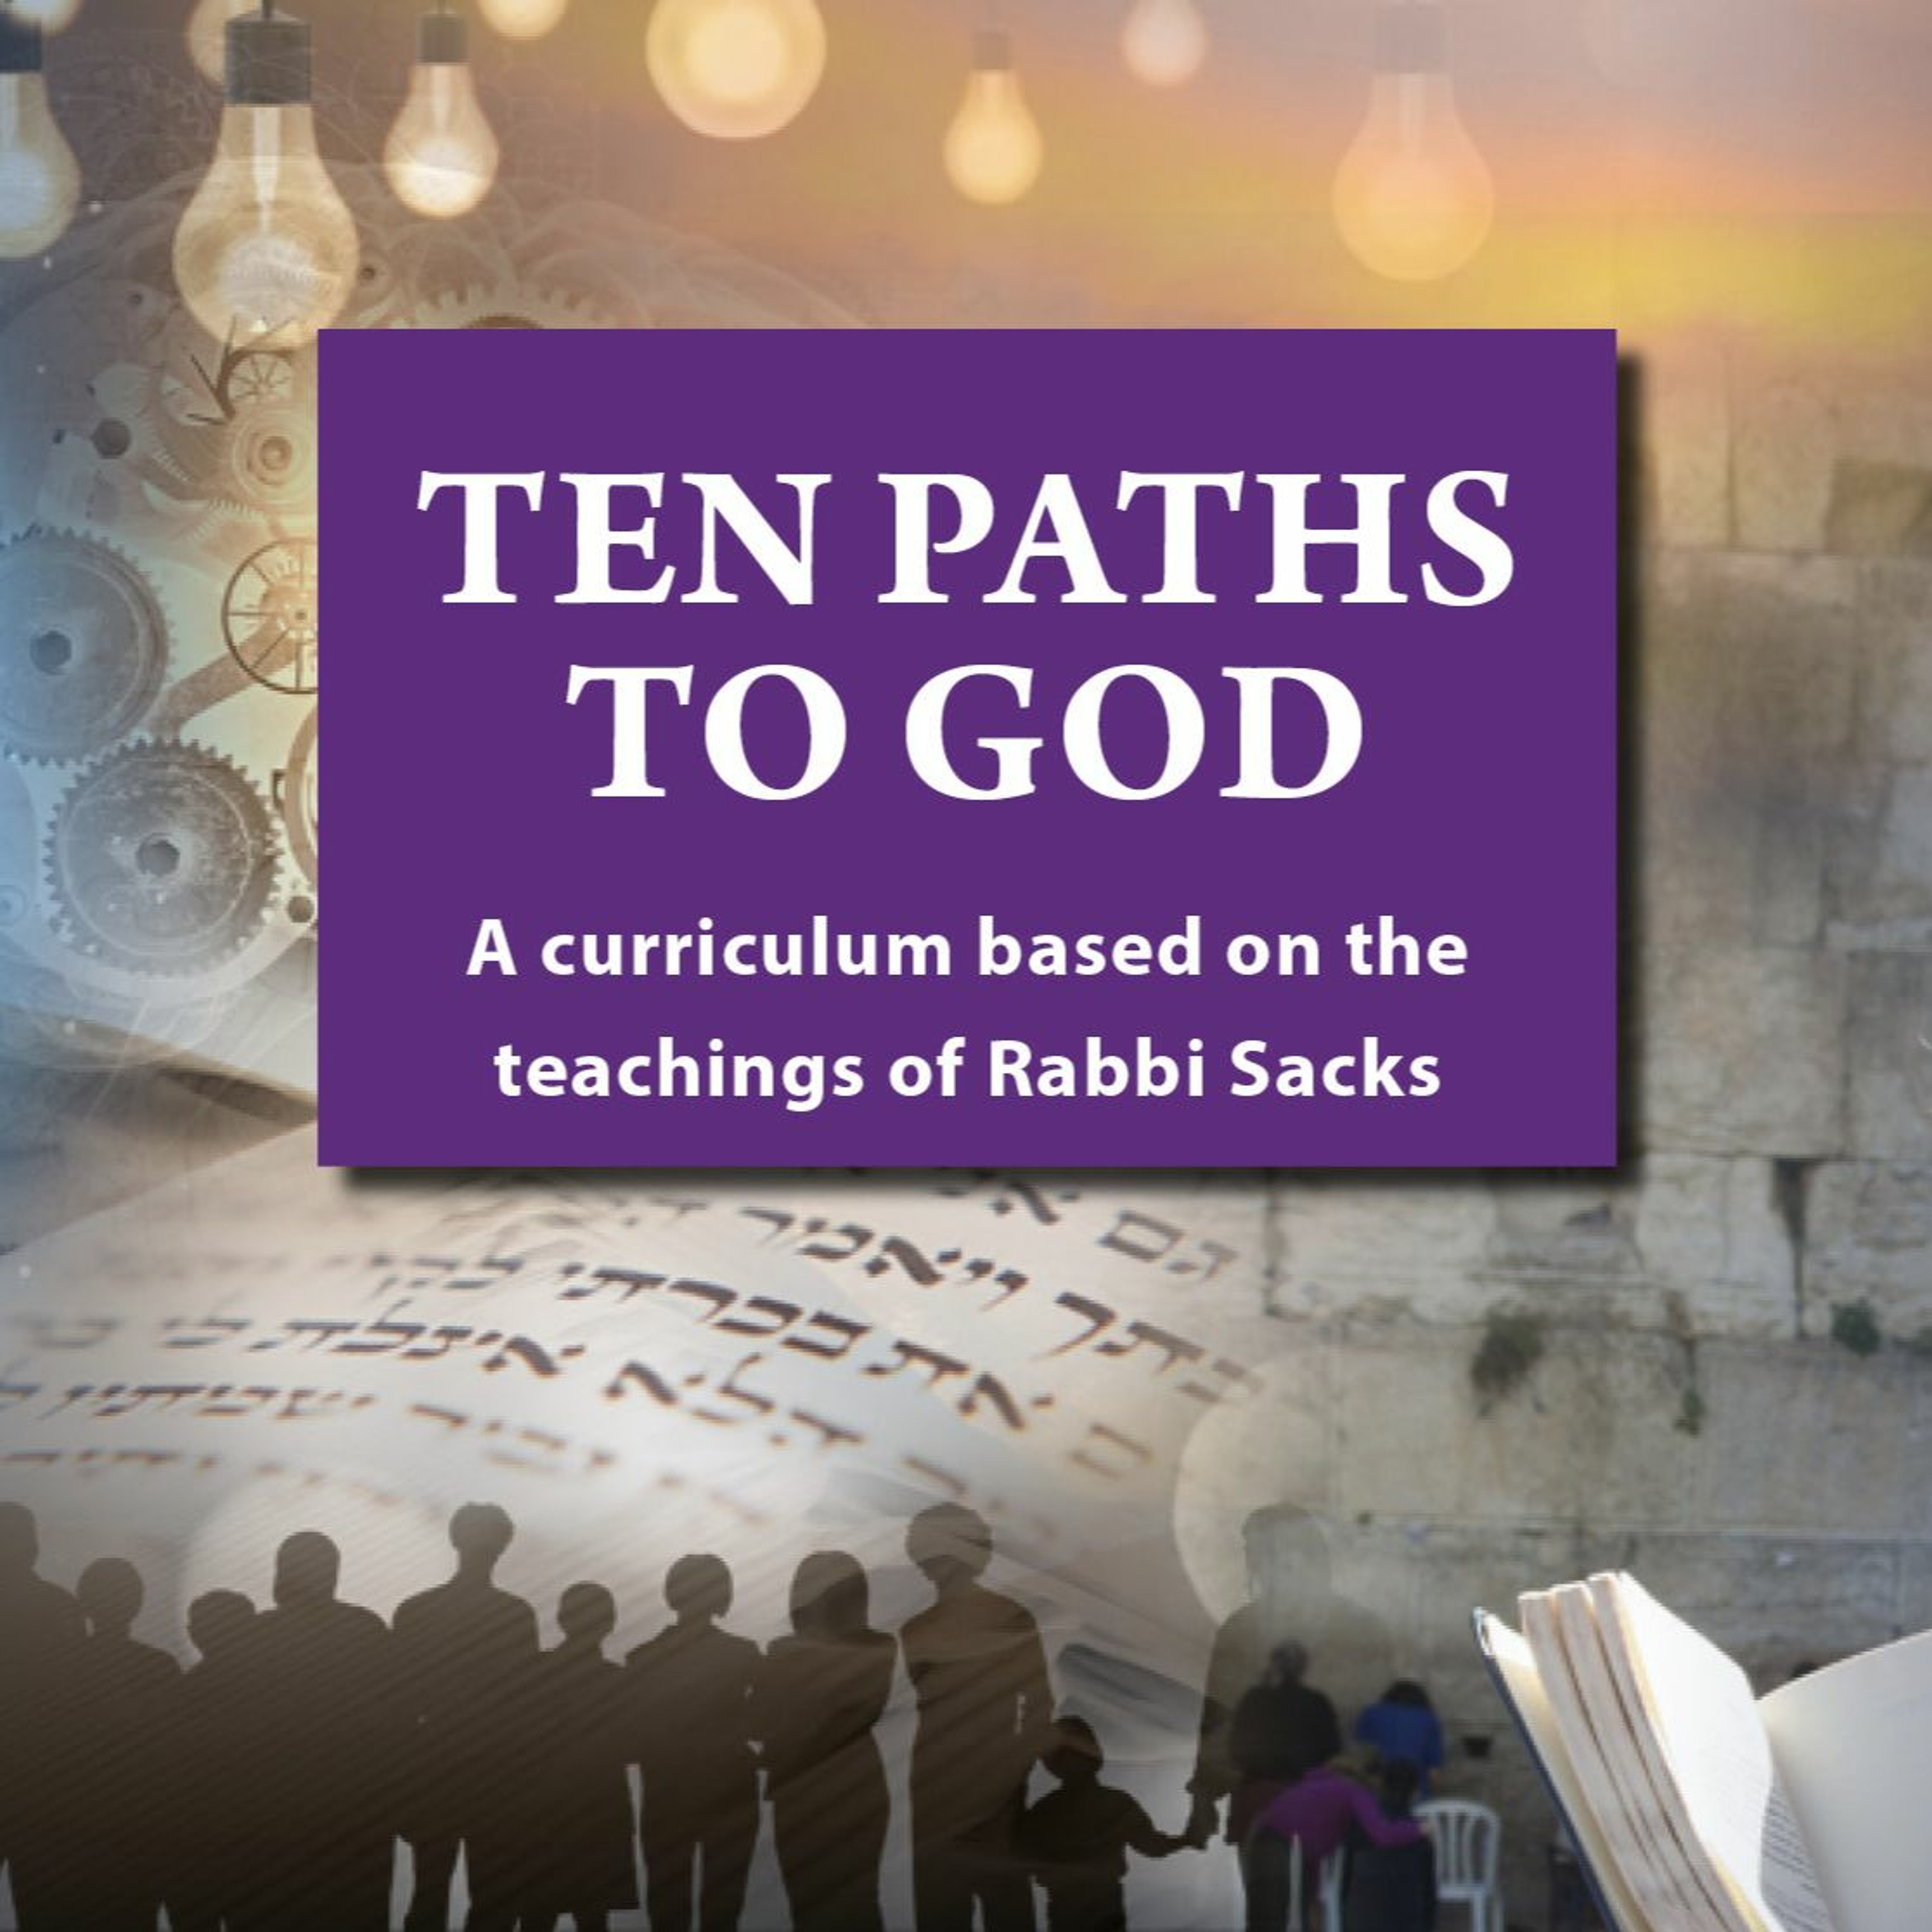 The Way Of Study Listening To God (Ten Paths To God - Unit 3)